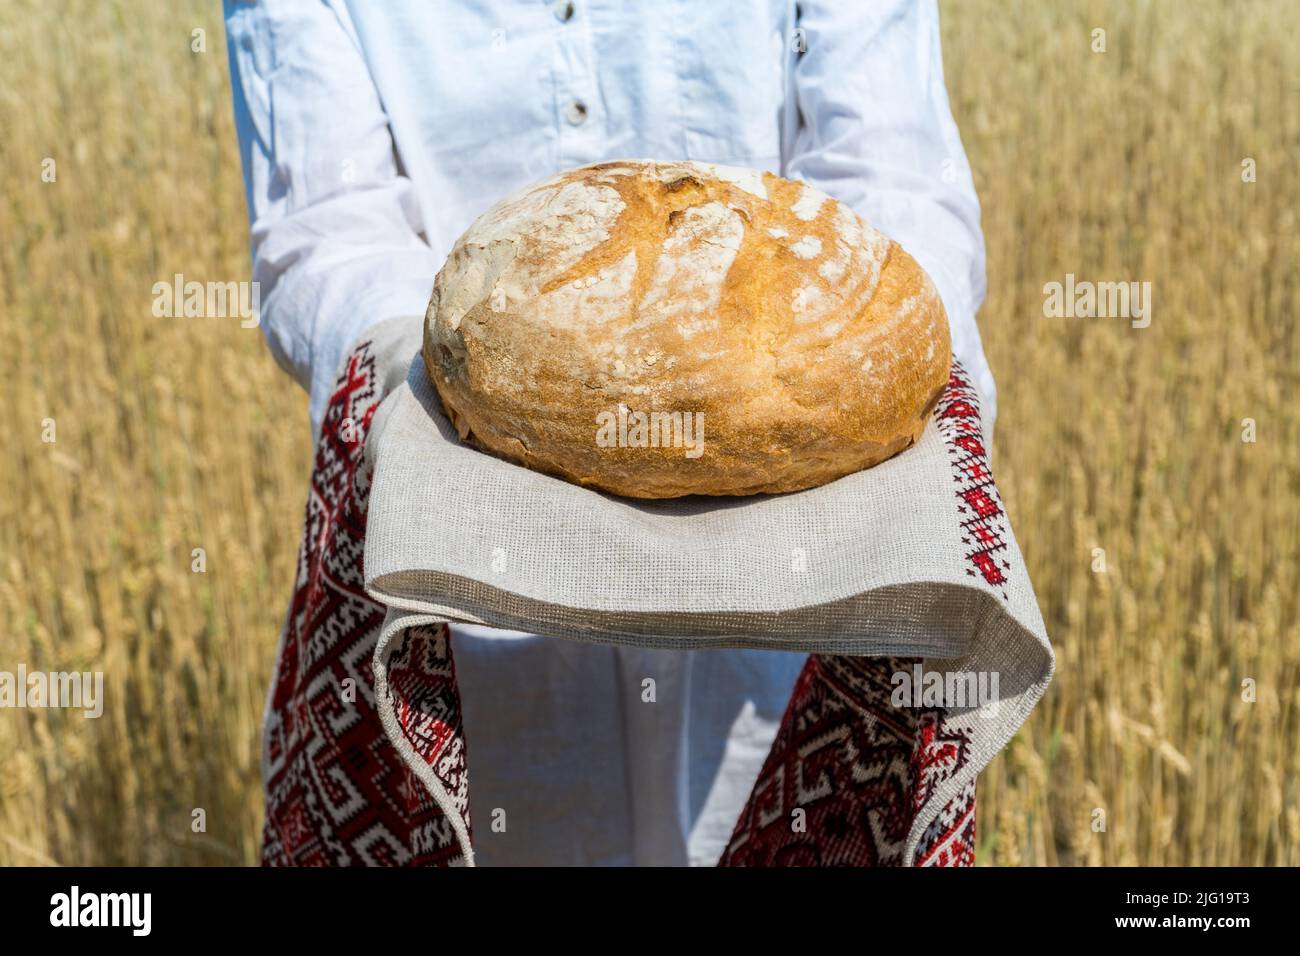 Female hands holding home baked bread loaf above her head over a blue summer sky in a wheat field. Hospitality and food supply concept. Stock Photo